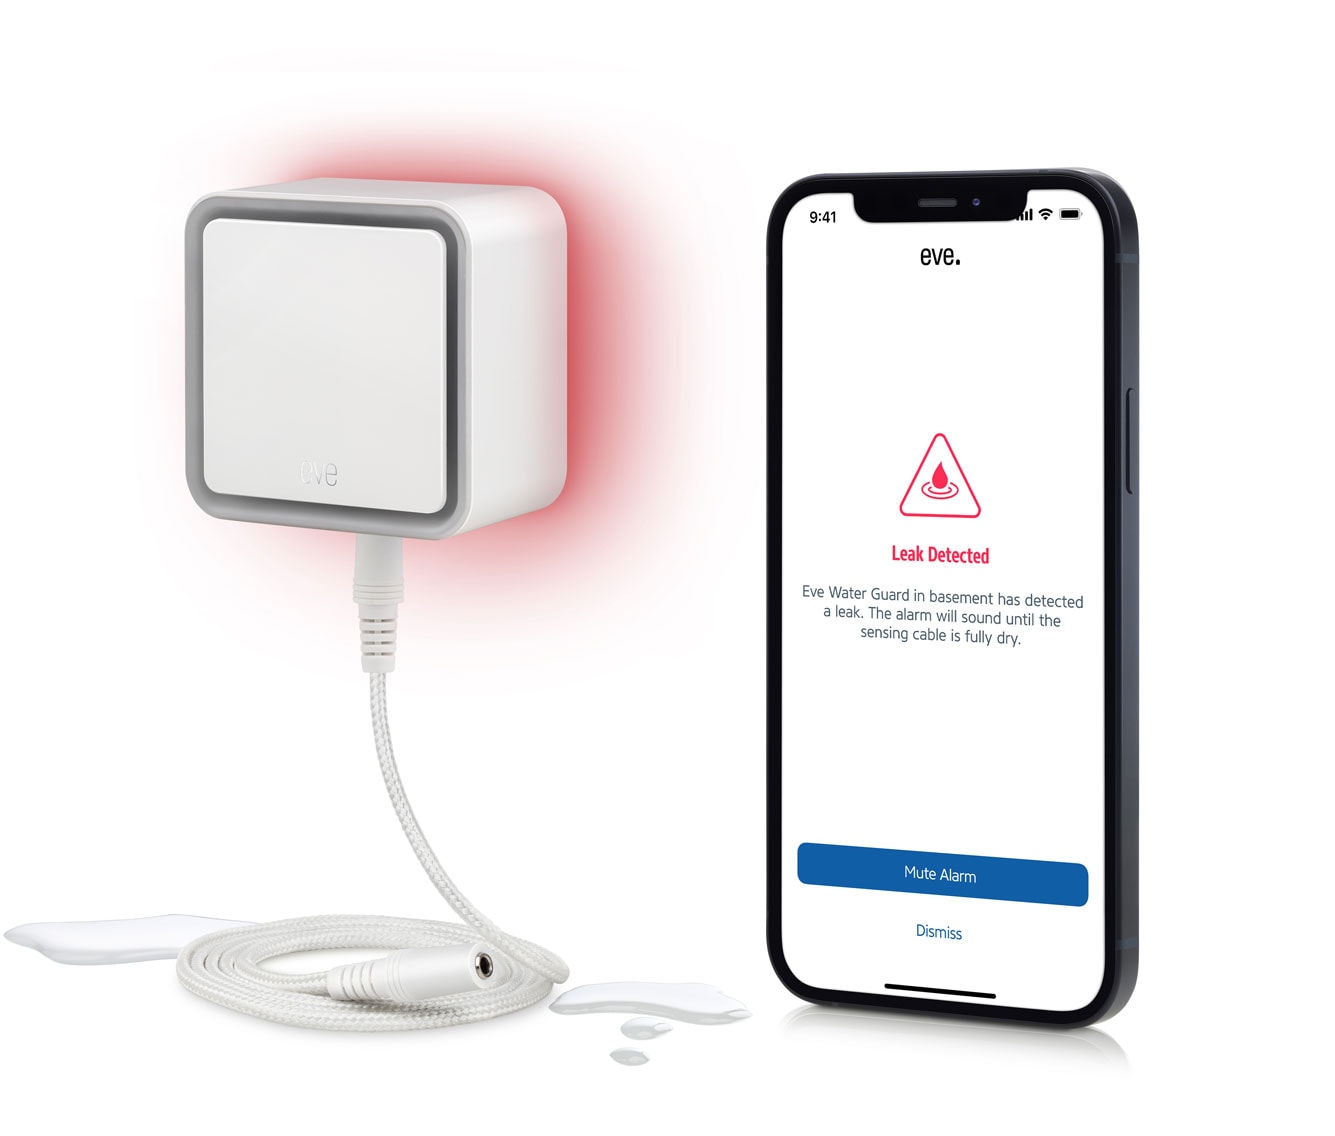 Now with Thread support, Eve Water Guard sends leak alerts to the Home app.